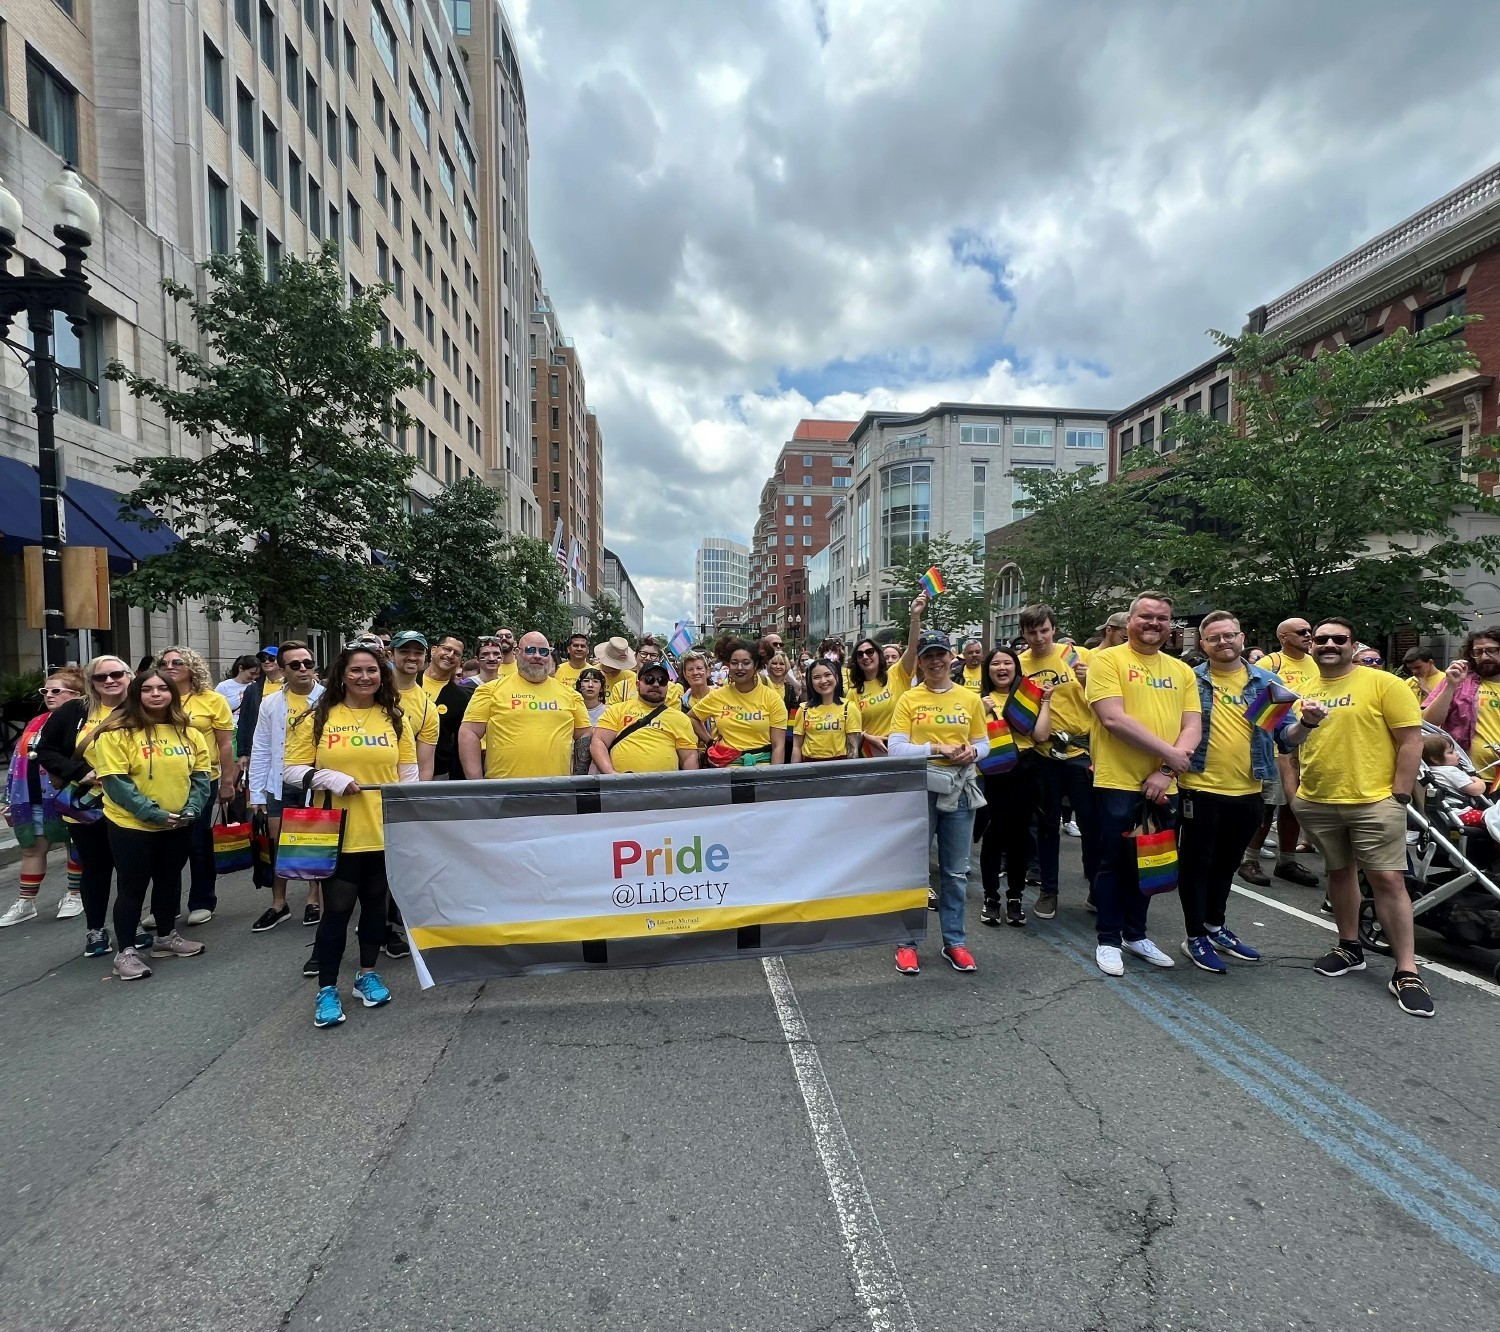 Members of Liberty Mutual’s ERG, Pride@Liberty, proudly promoted Liberty’s inclusive environment for LGBTQ+ employees.